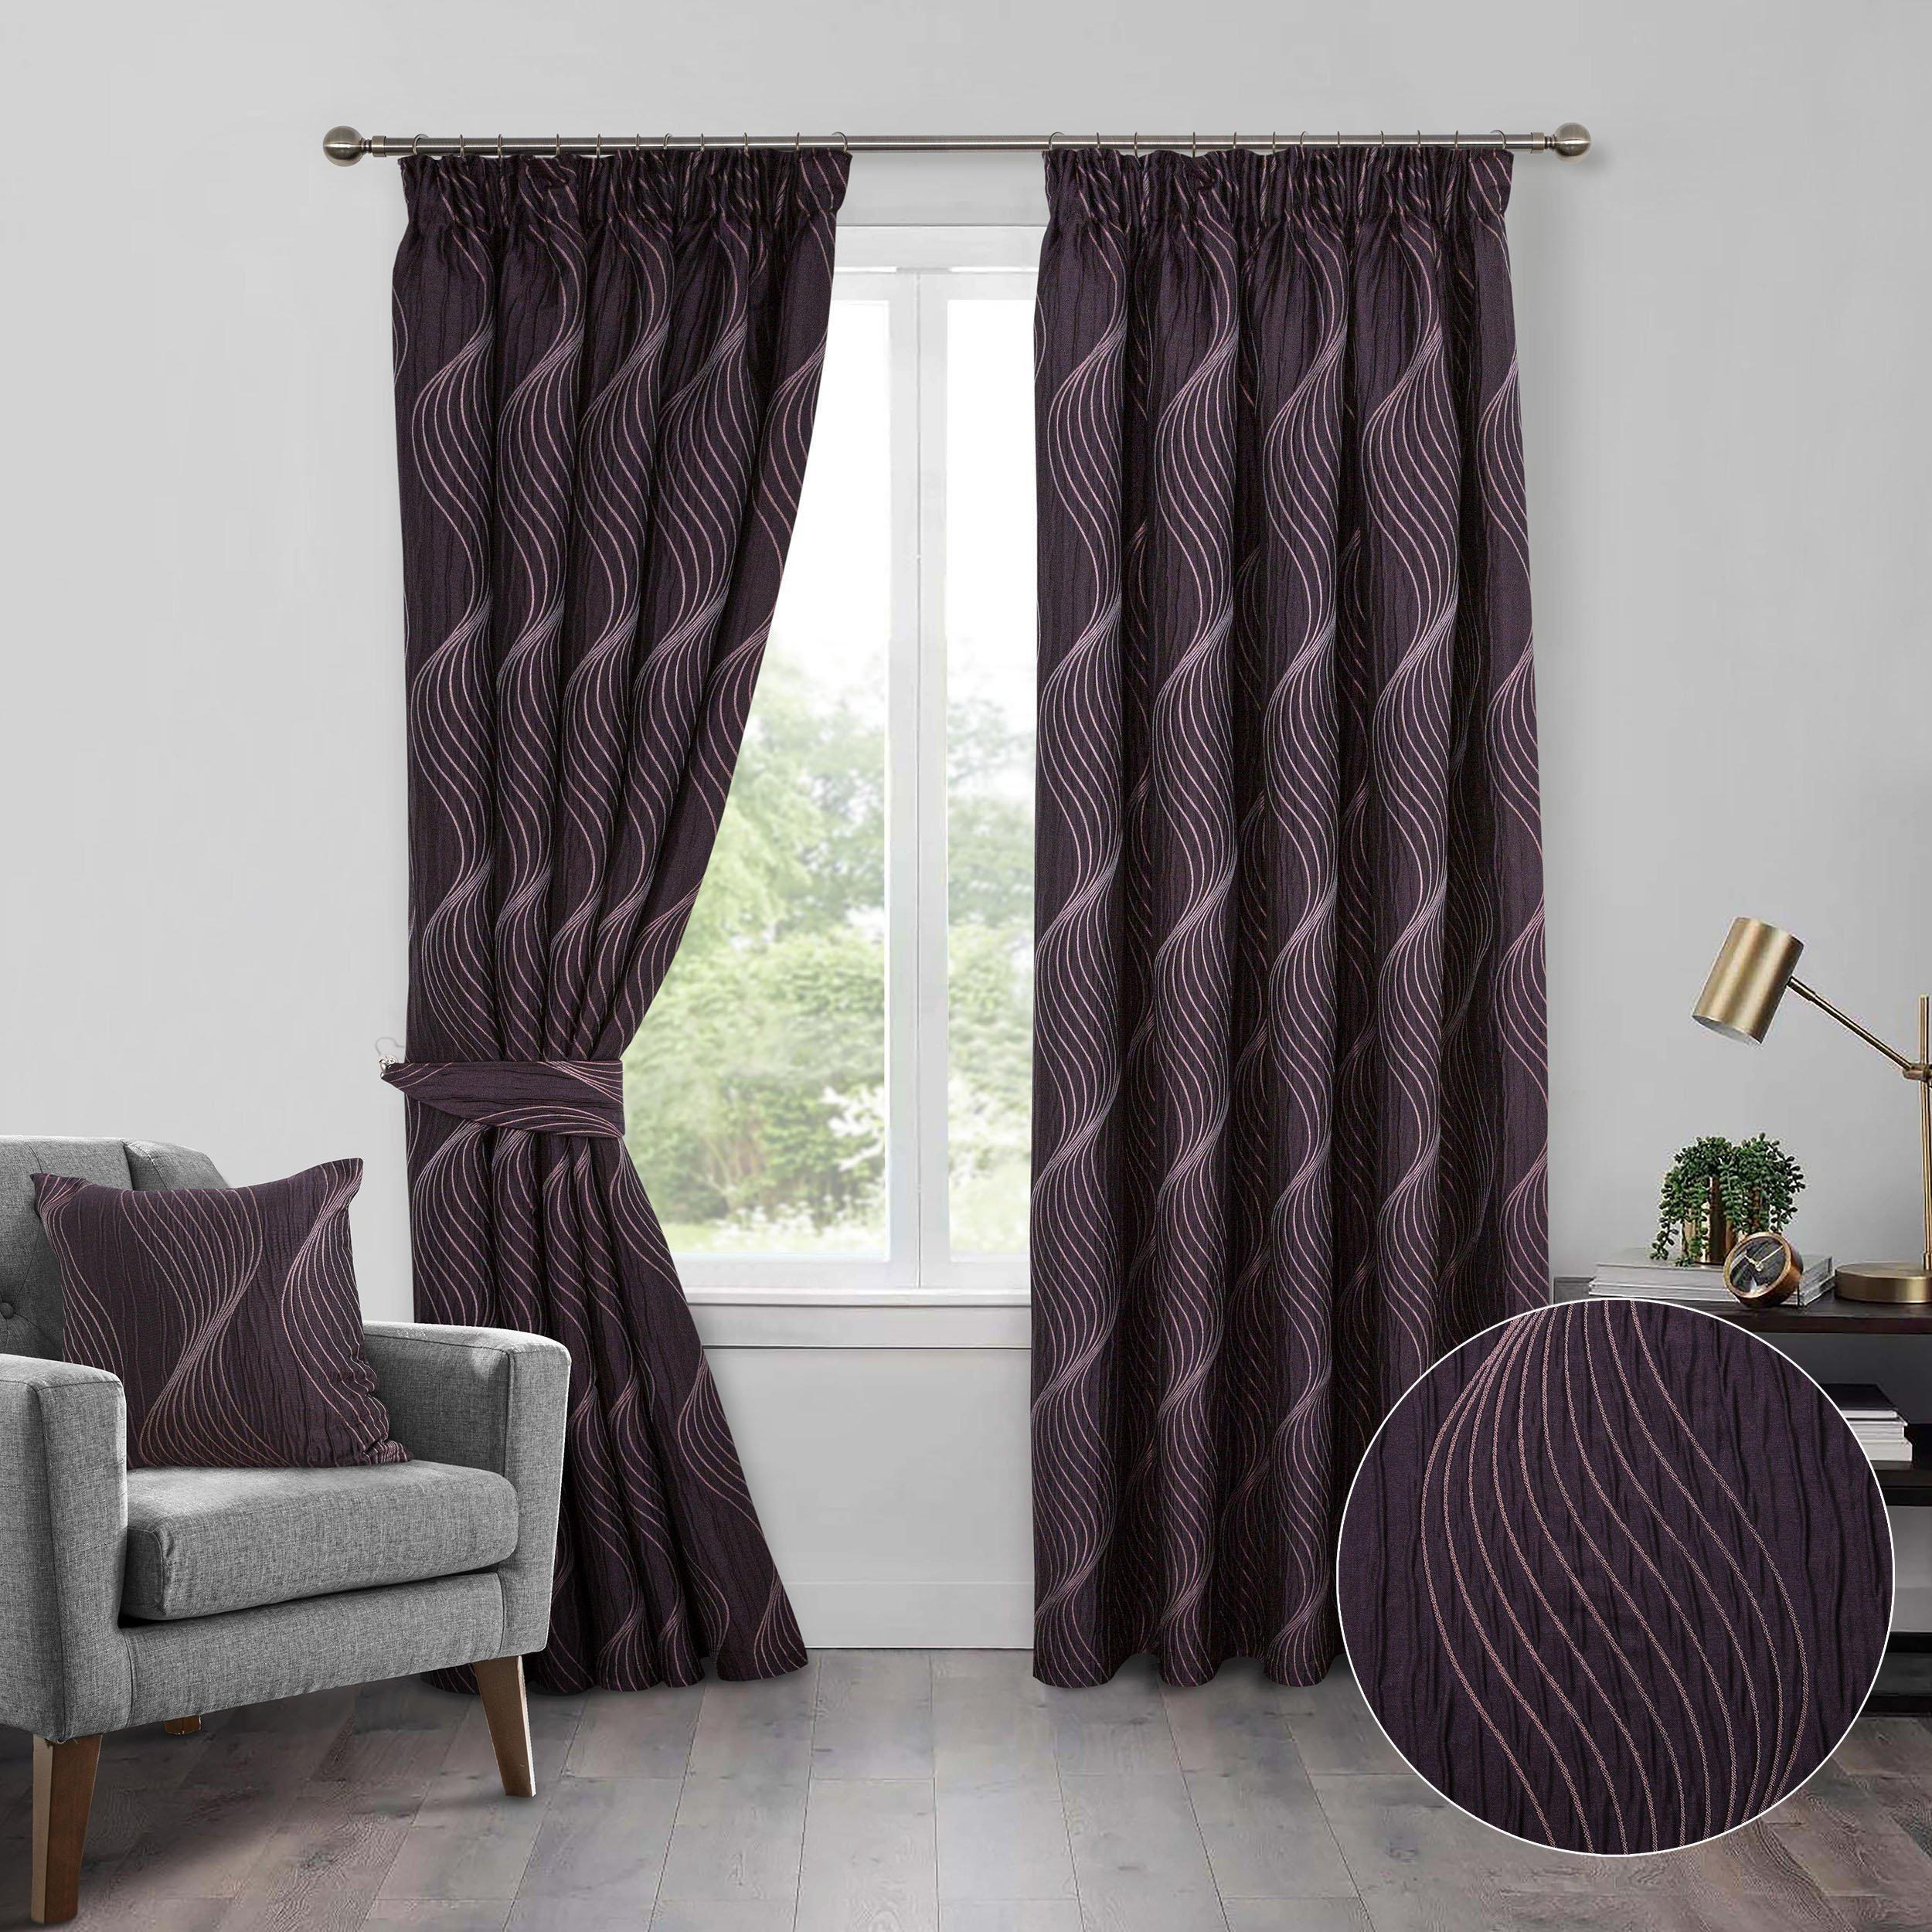 Zen Fully Lined 3 Inches Pencil Pleat Curtains pair - image 1